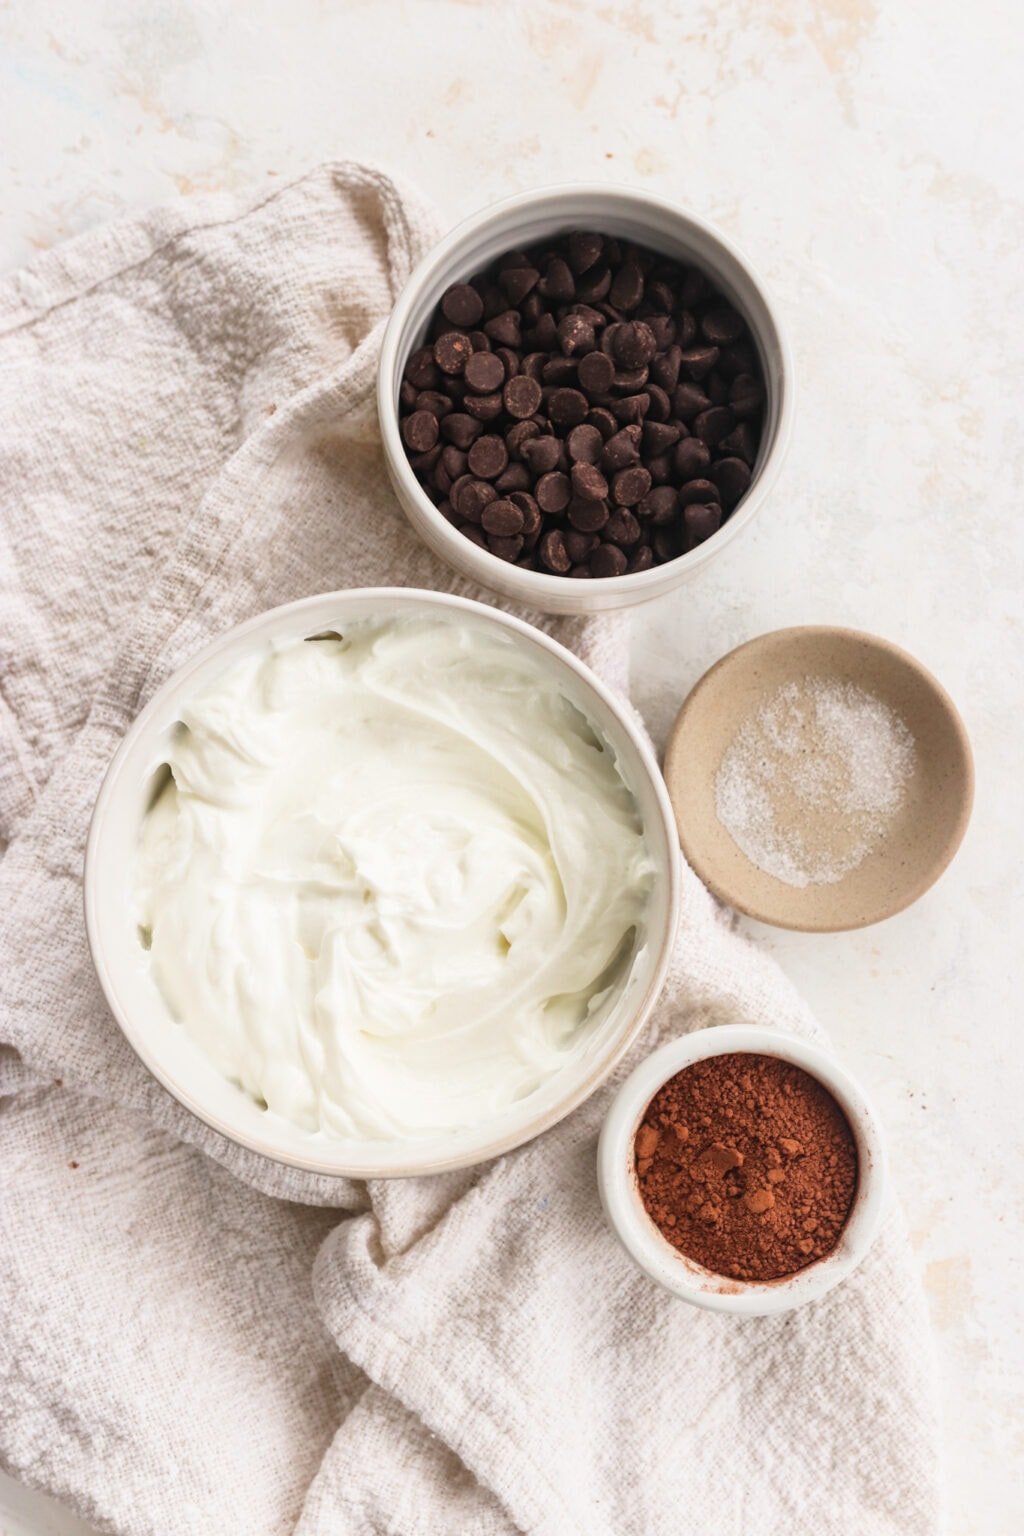 Ingredients for Whipped Greek Yogurt Chocolate Mousse in white glass bowls, including chocolate chips, Greek yogurt, cacao and salt